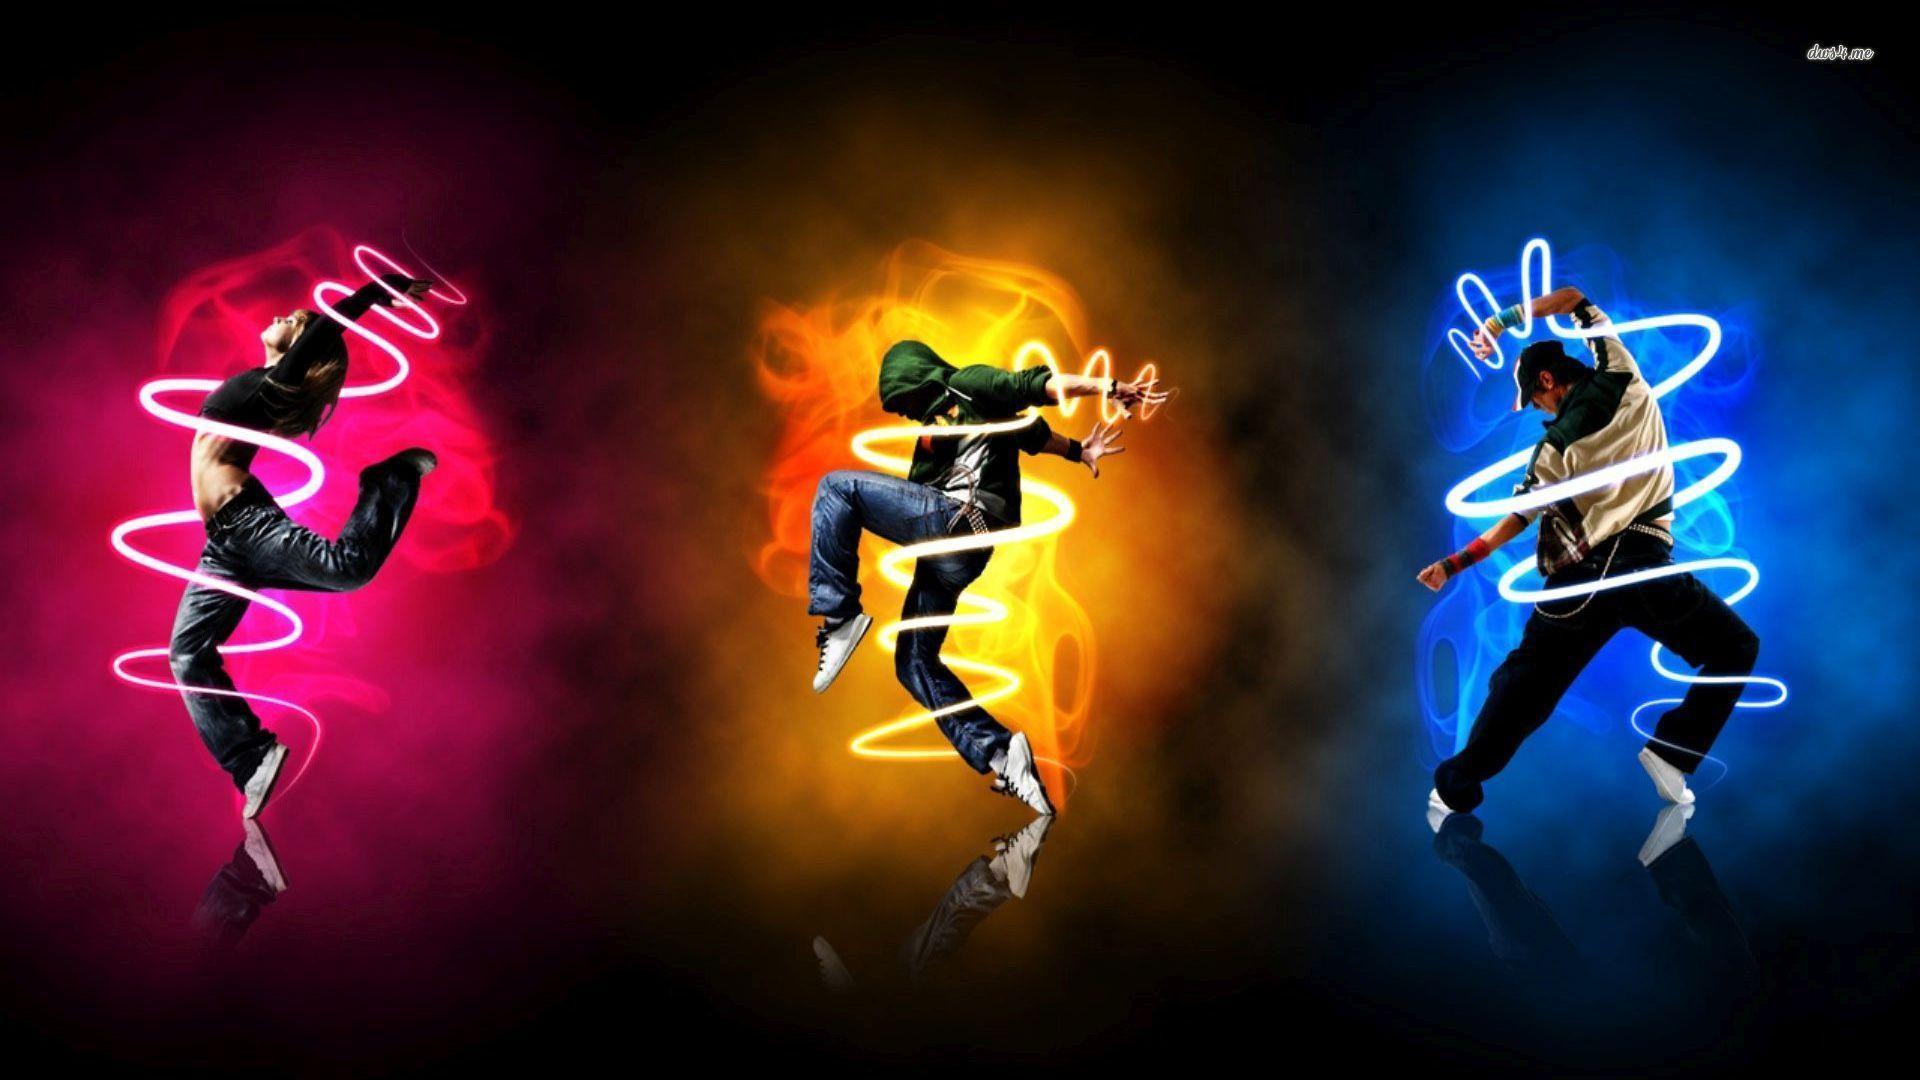 Group Dance Wallpaper Free Group Dance Background